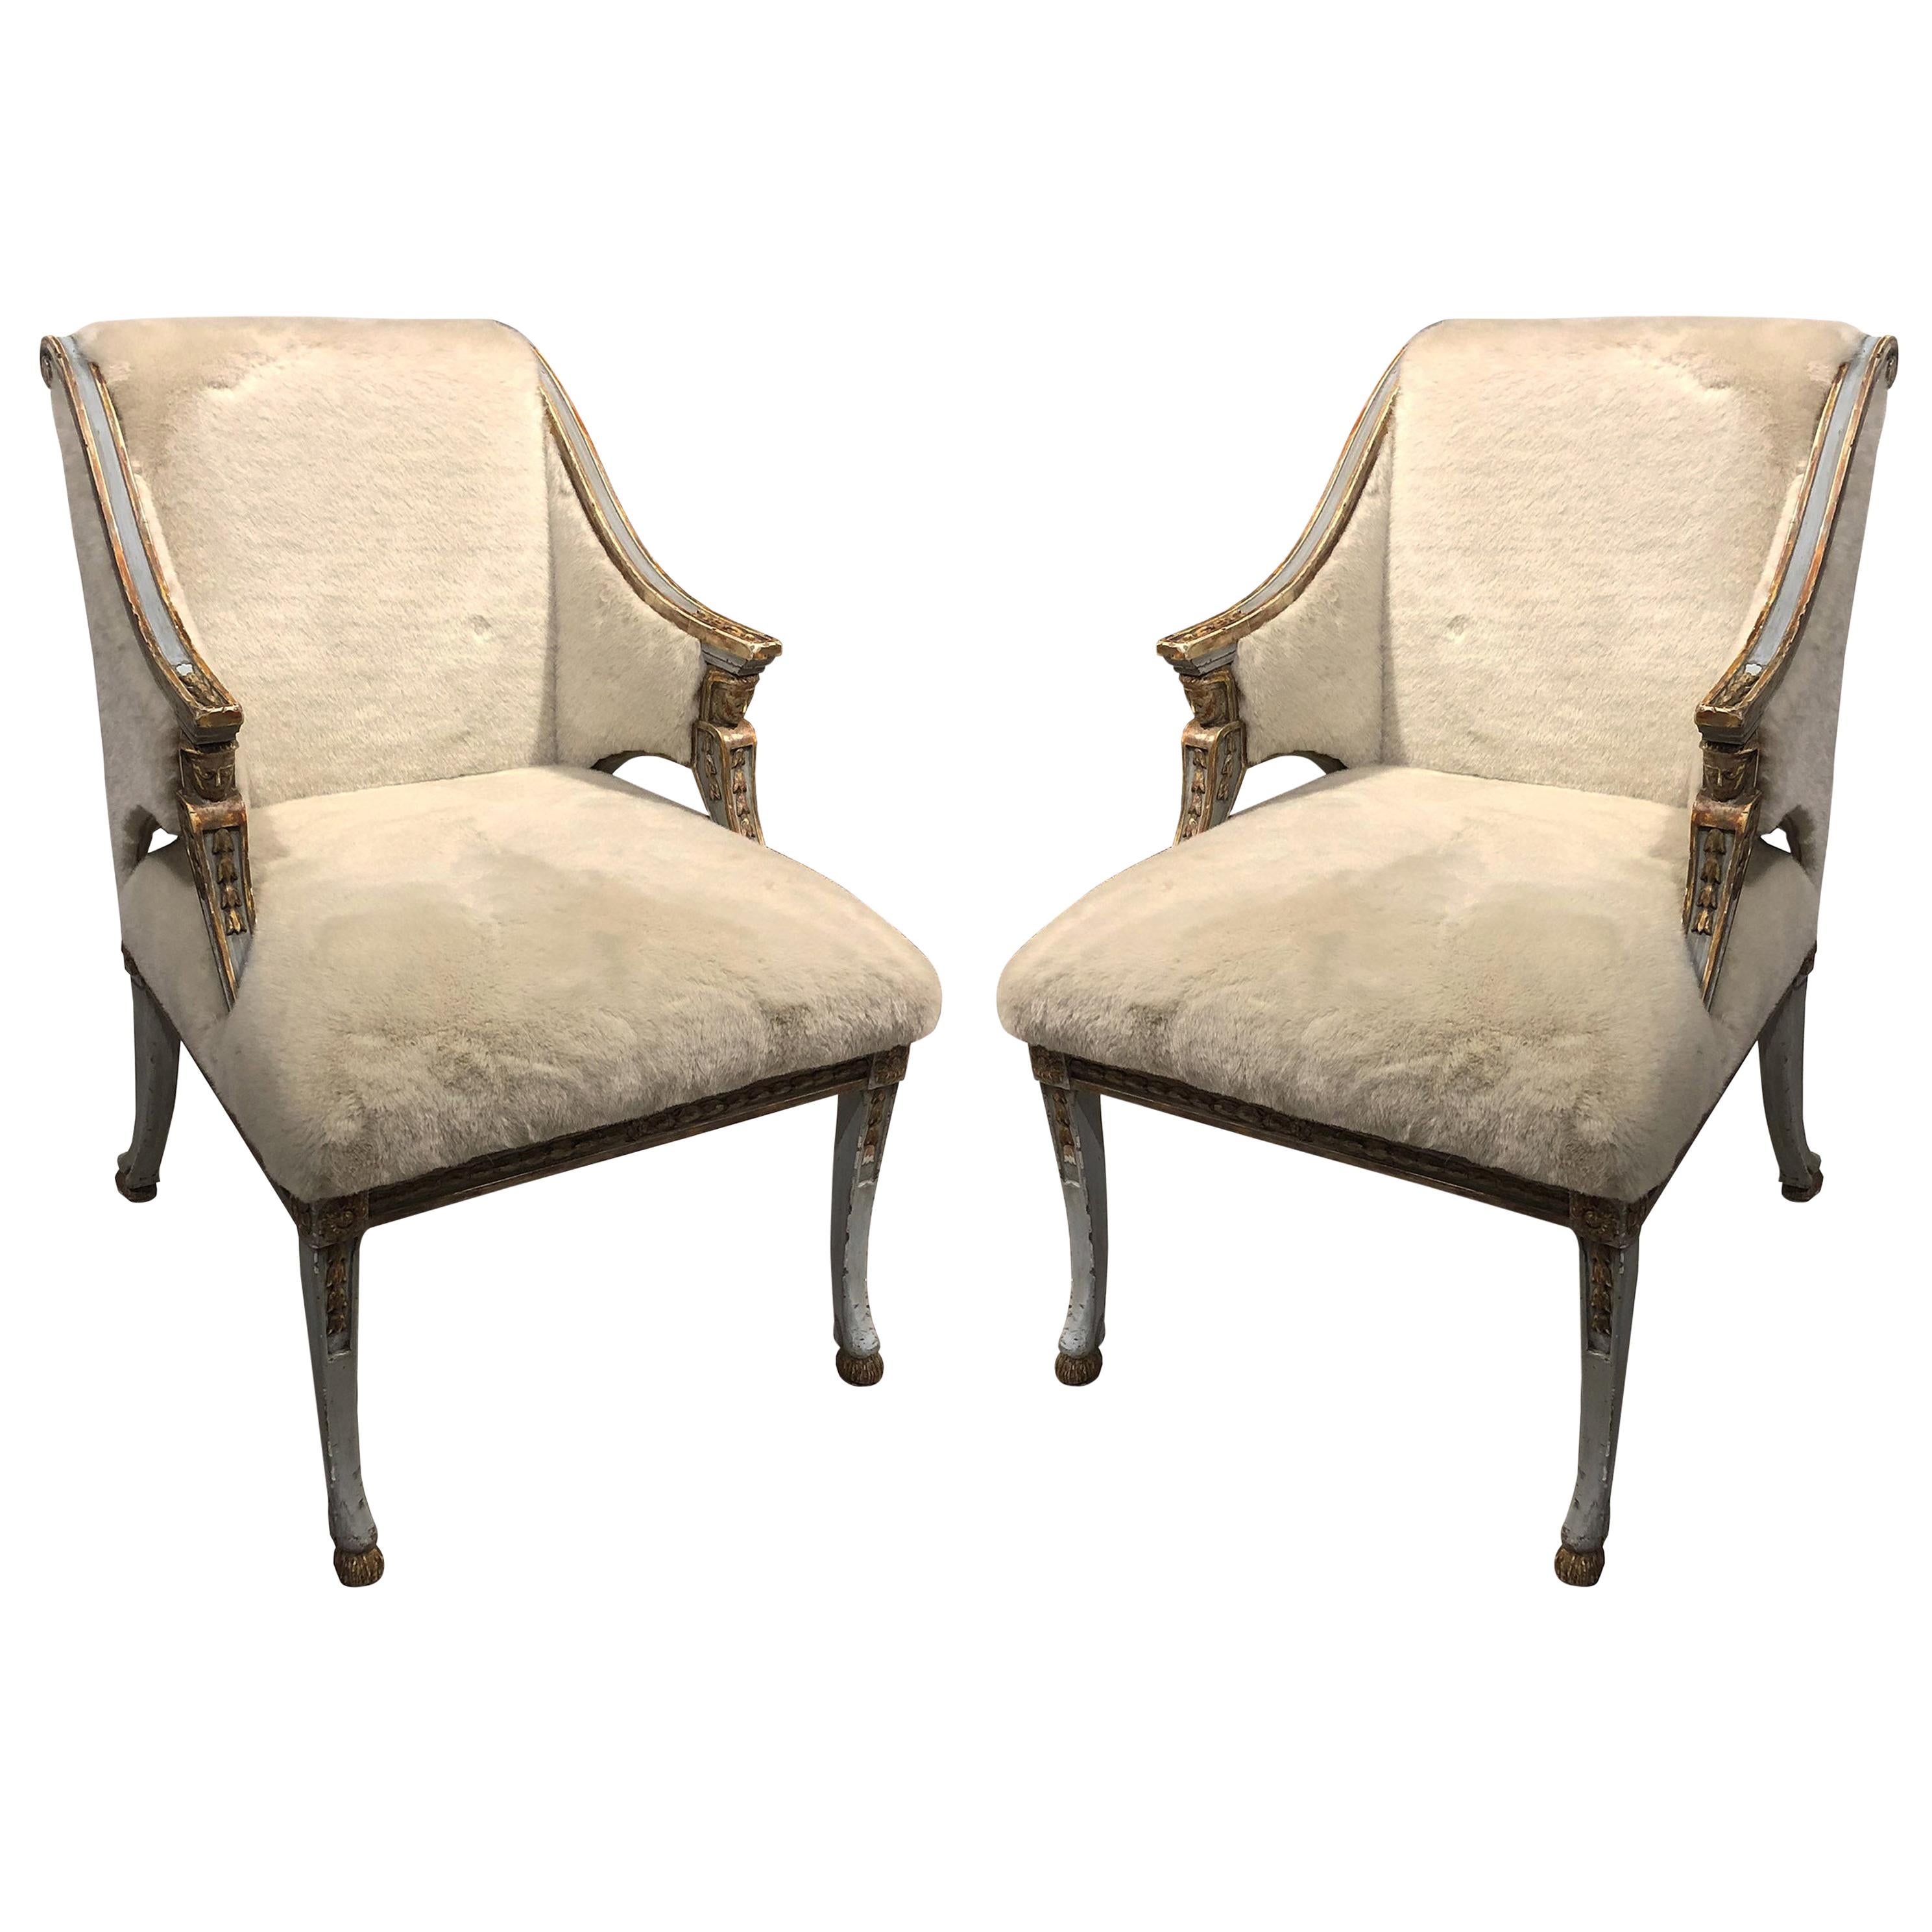 Pair of Swedish Blue Painted and Silver Gilt Armchairs